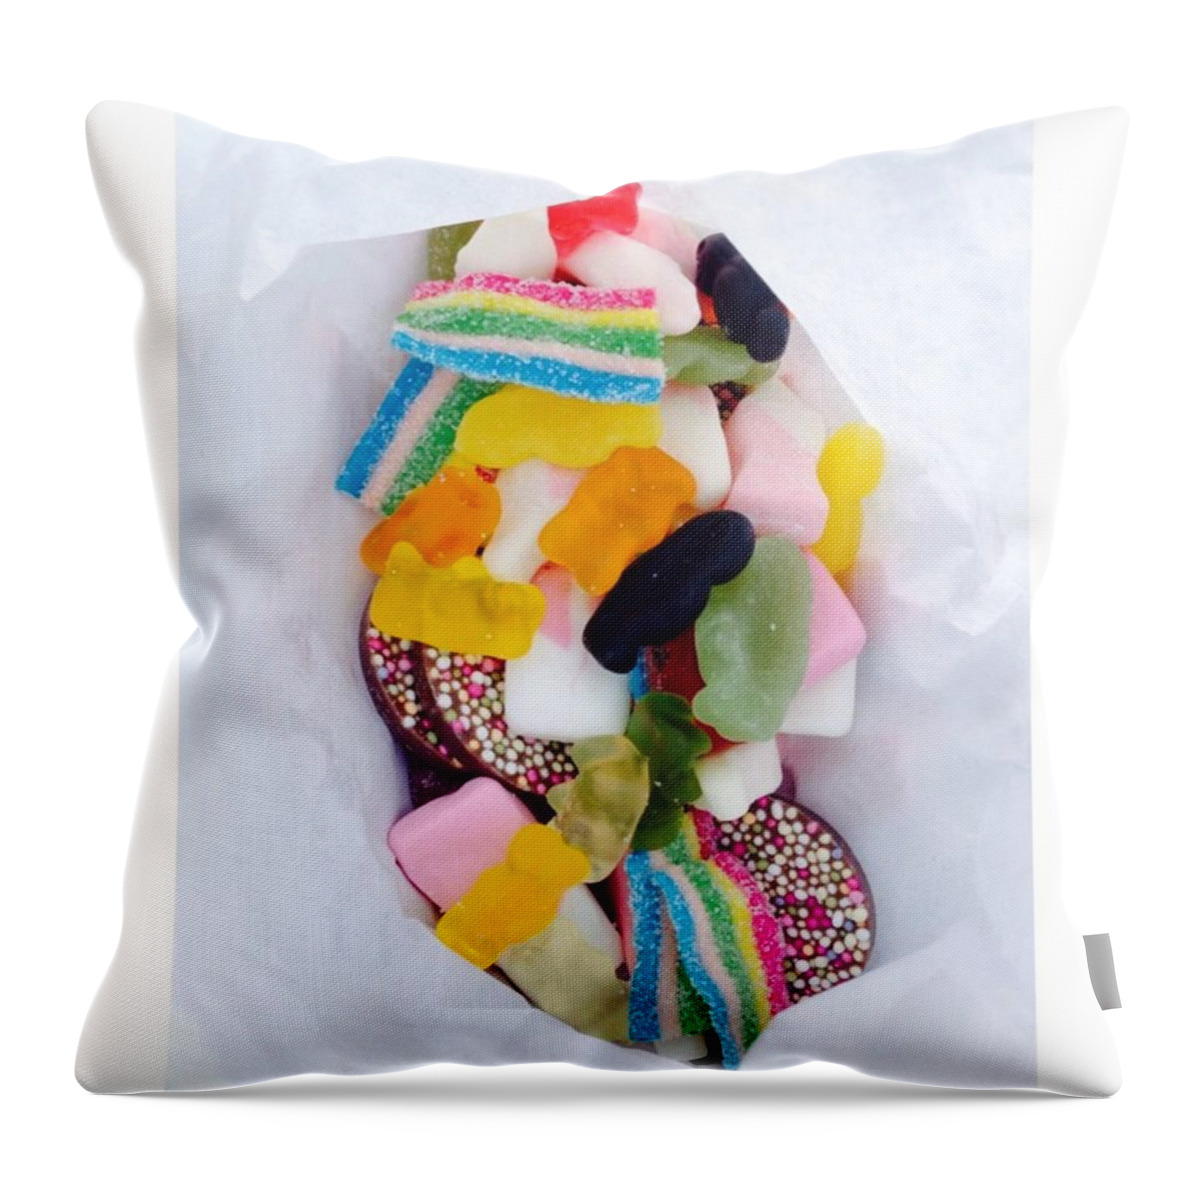 Sweets Throw Pillow featuring the photograph Pick N Mix by Heather Semple